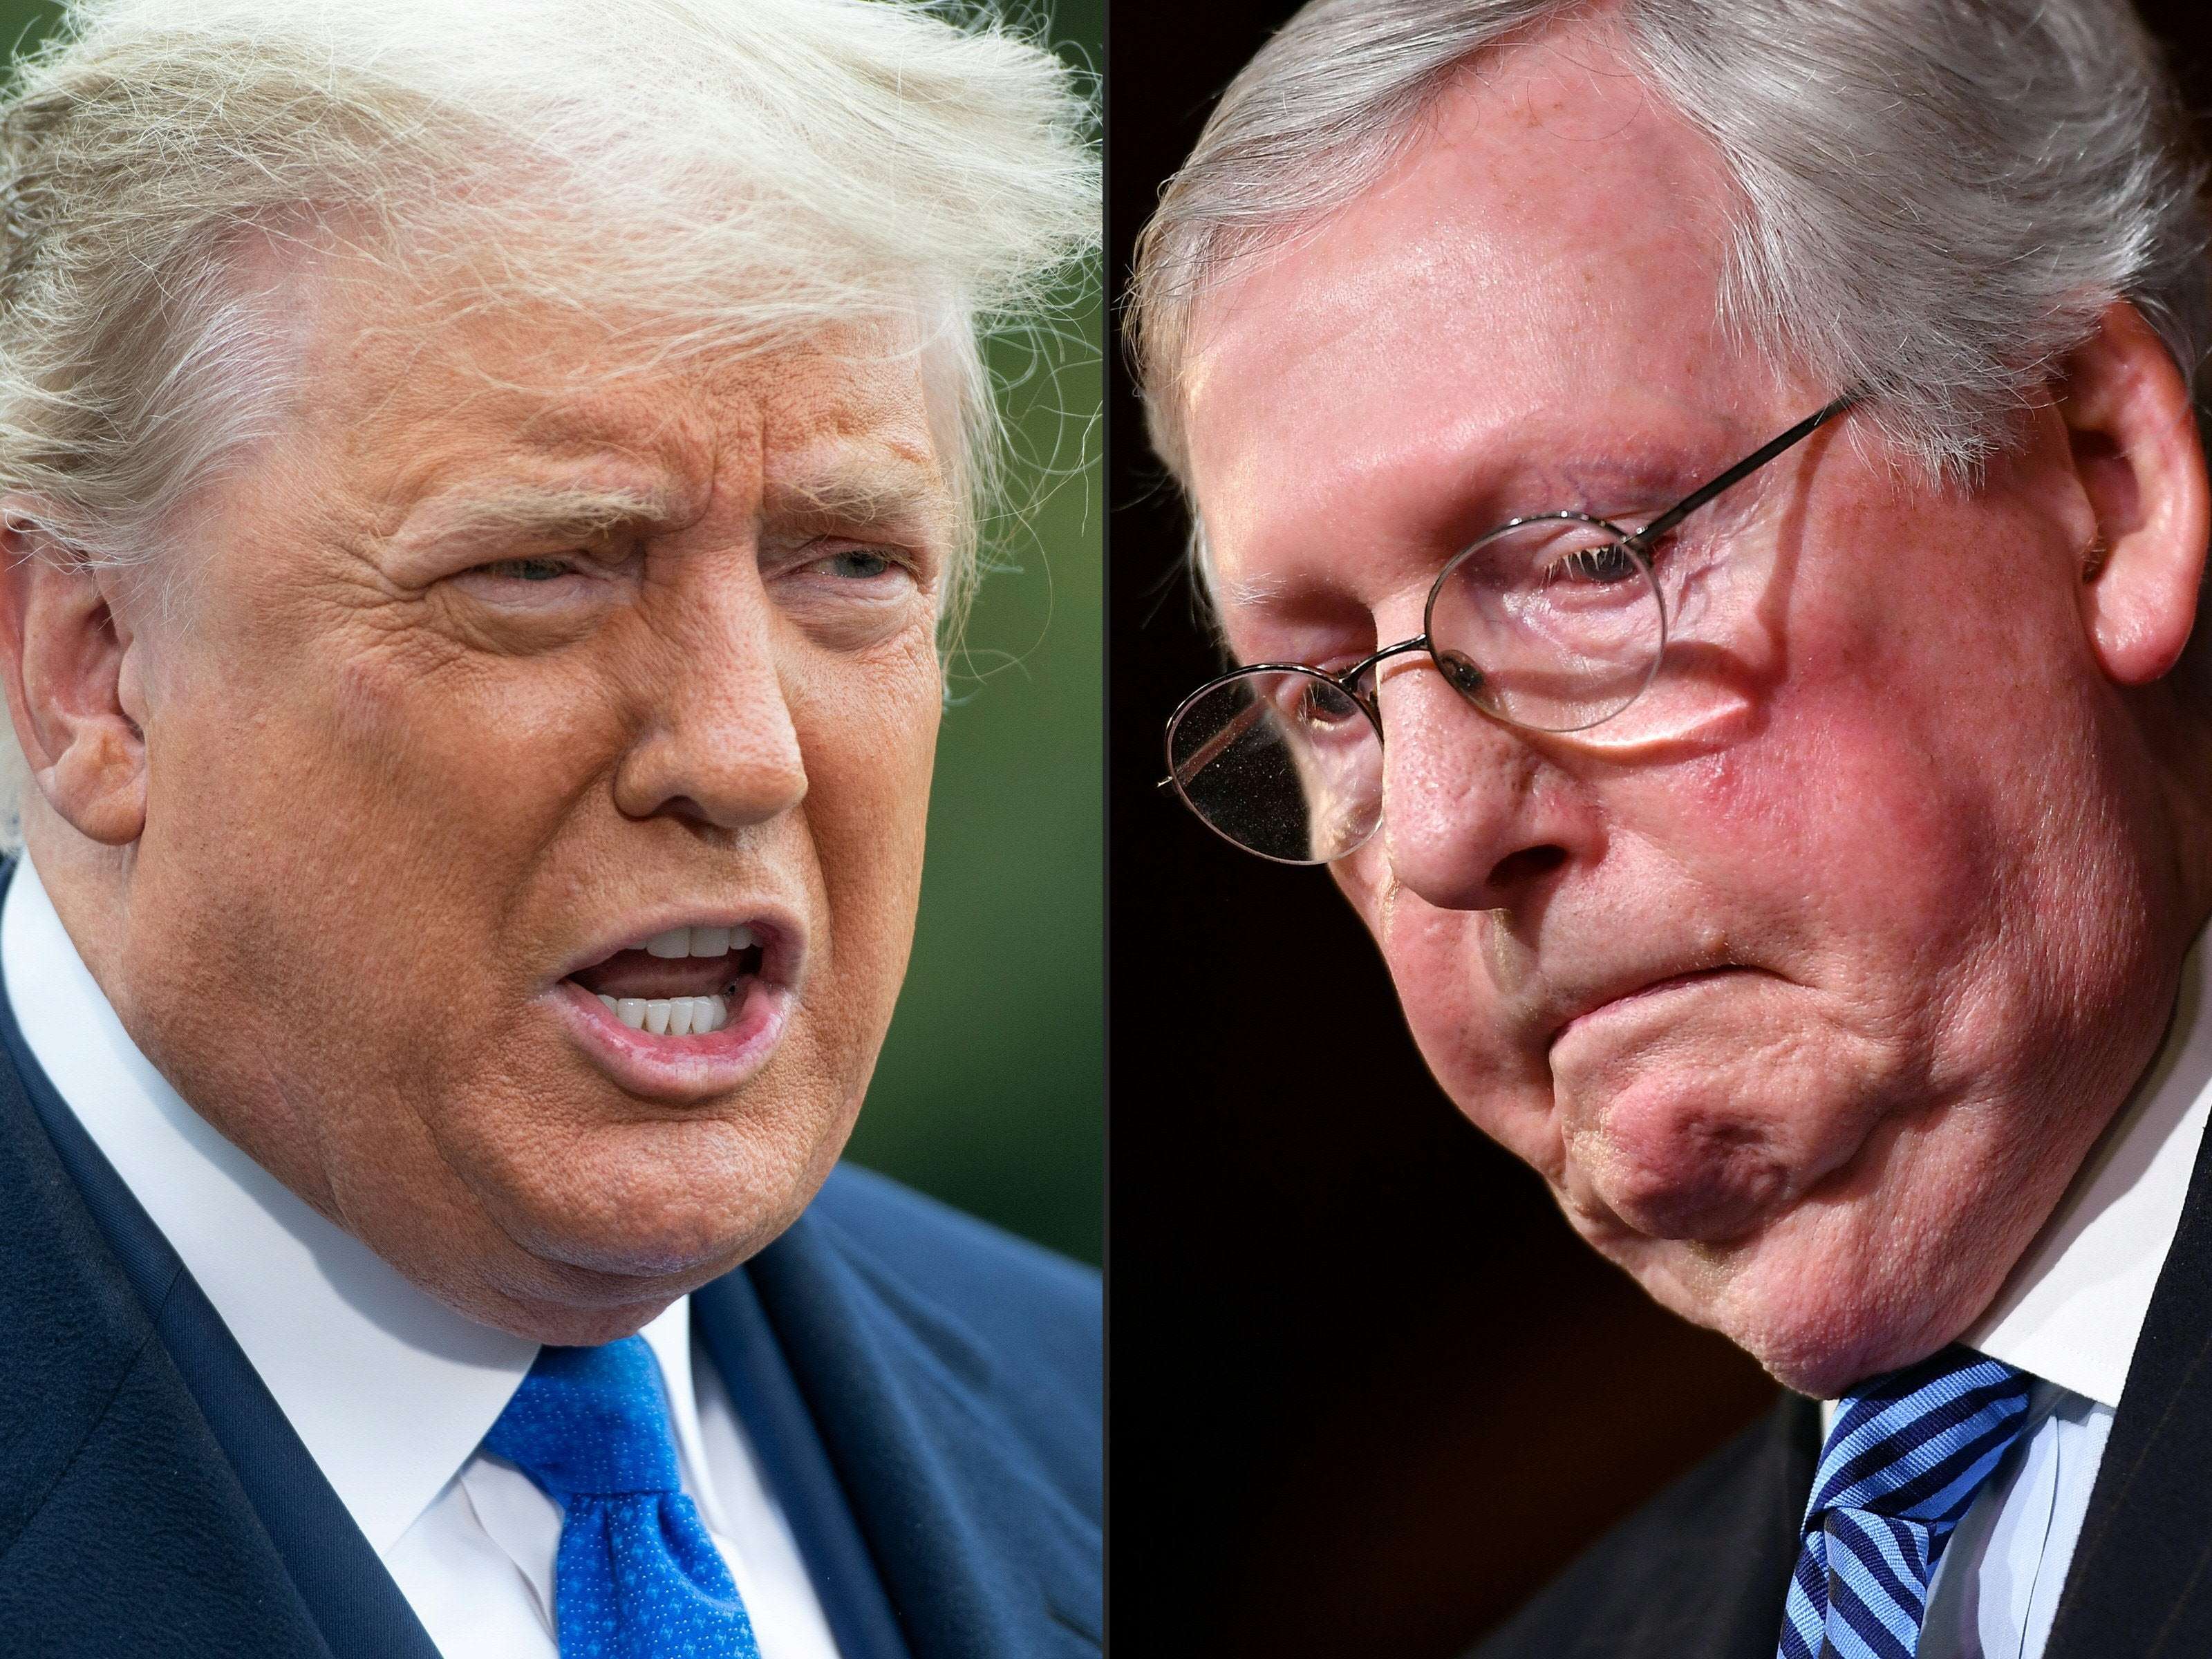 image for Trump Calls Mitch McConnell 'Disloyal Sleaze Bag' as Jan 6 Actions Revealed